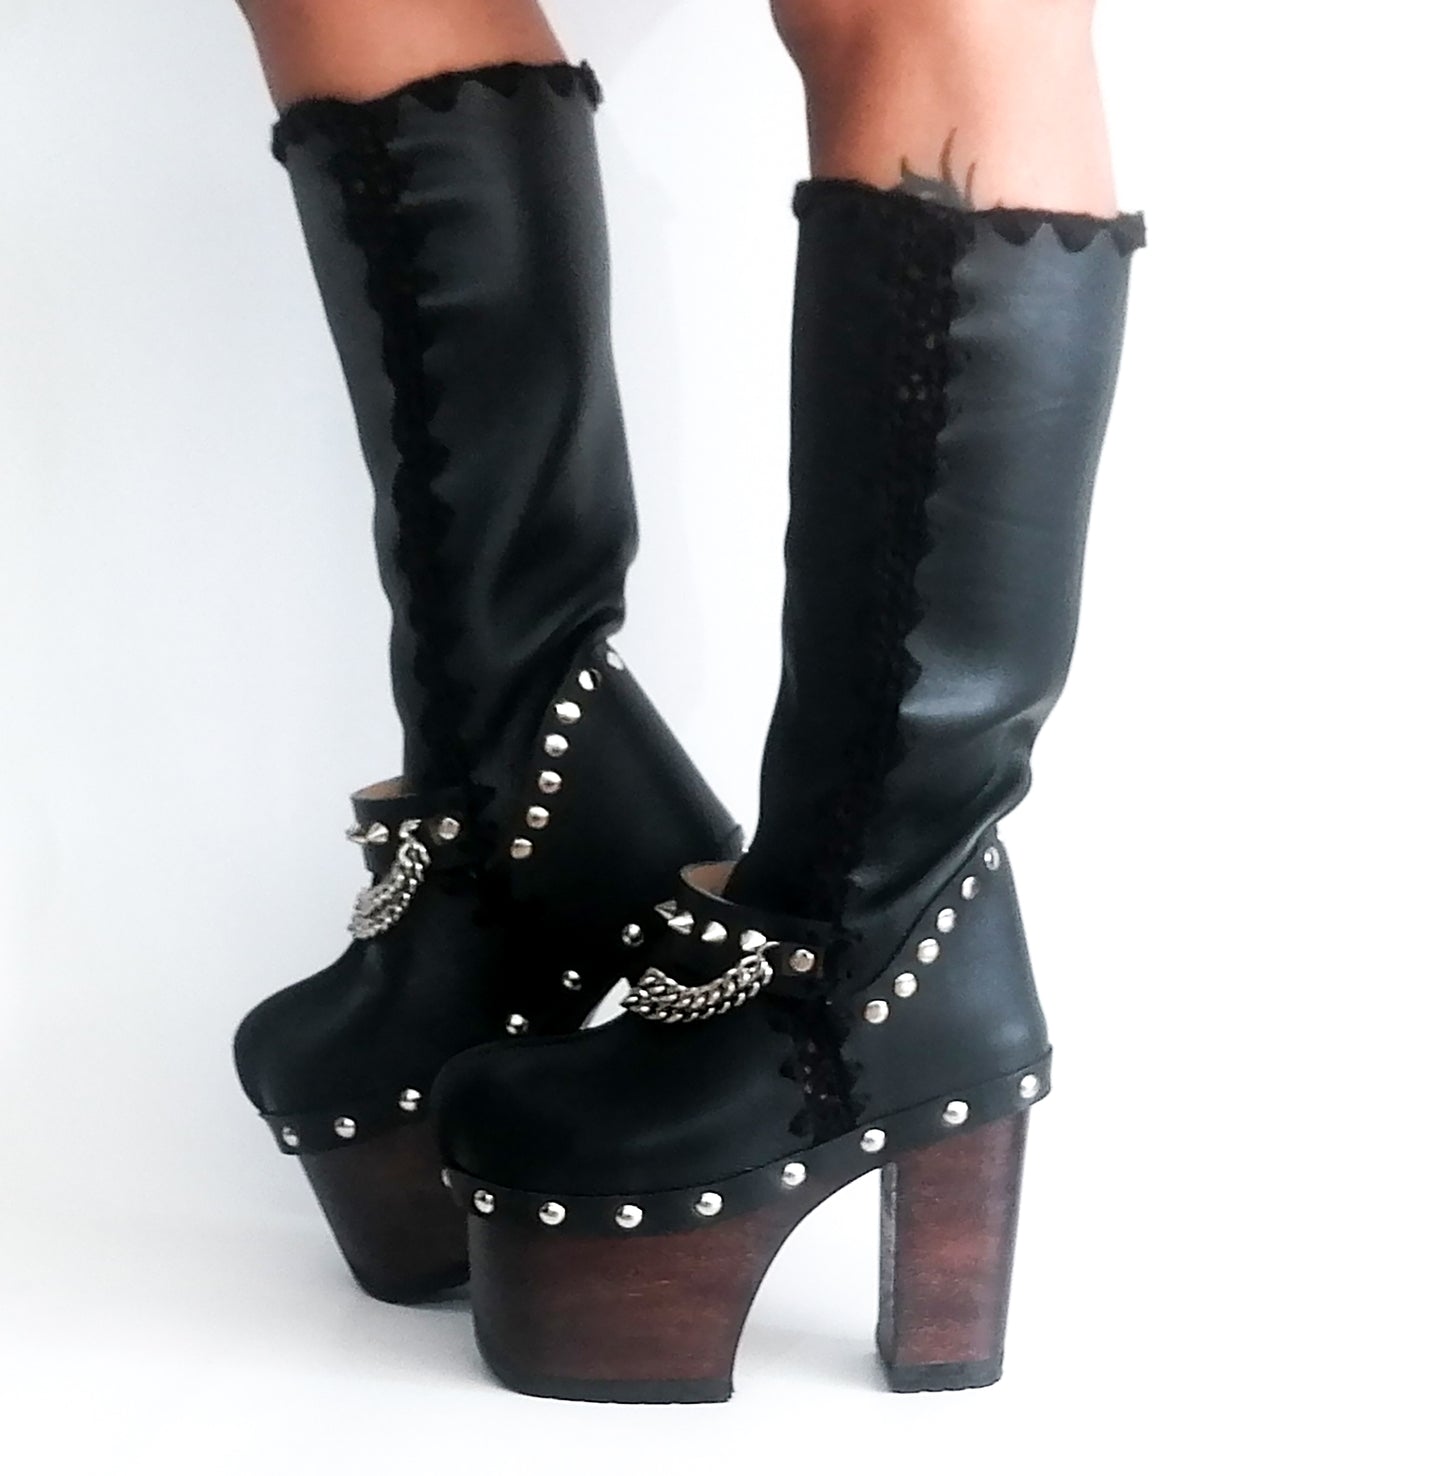 Super high heel platform boots. Black leather boots with studs and silver chains. Super high wooden heel. Sizes 34 to 47. High quality handmade leather shoes.